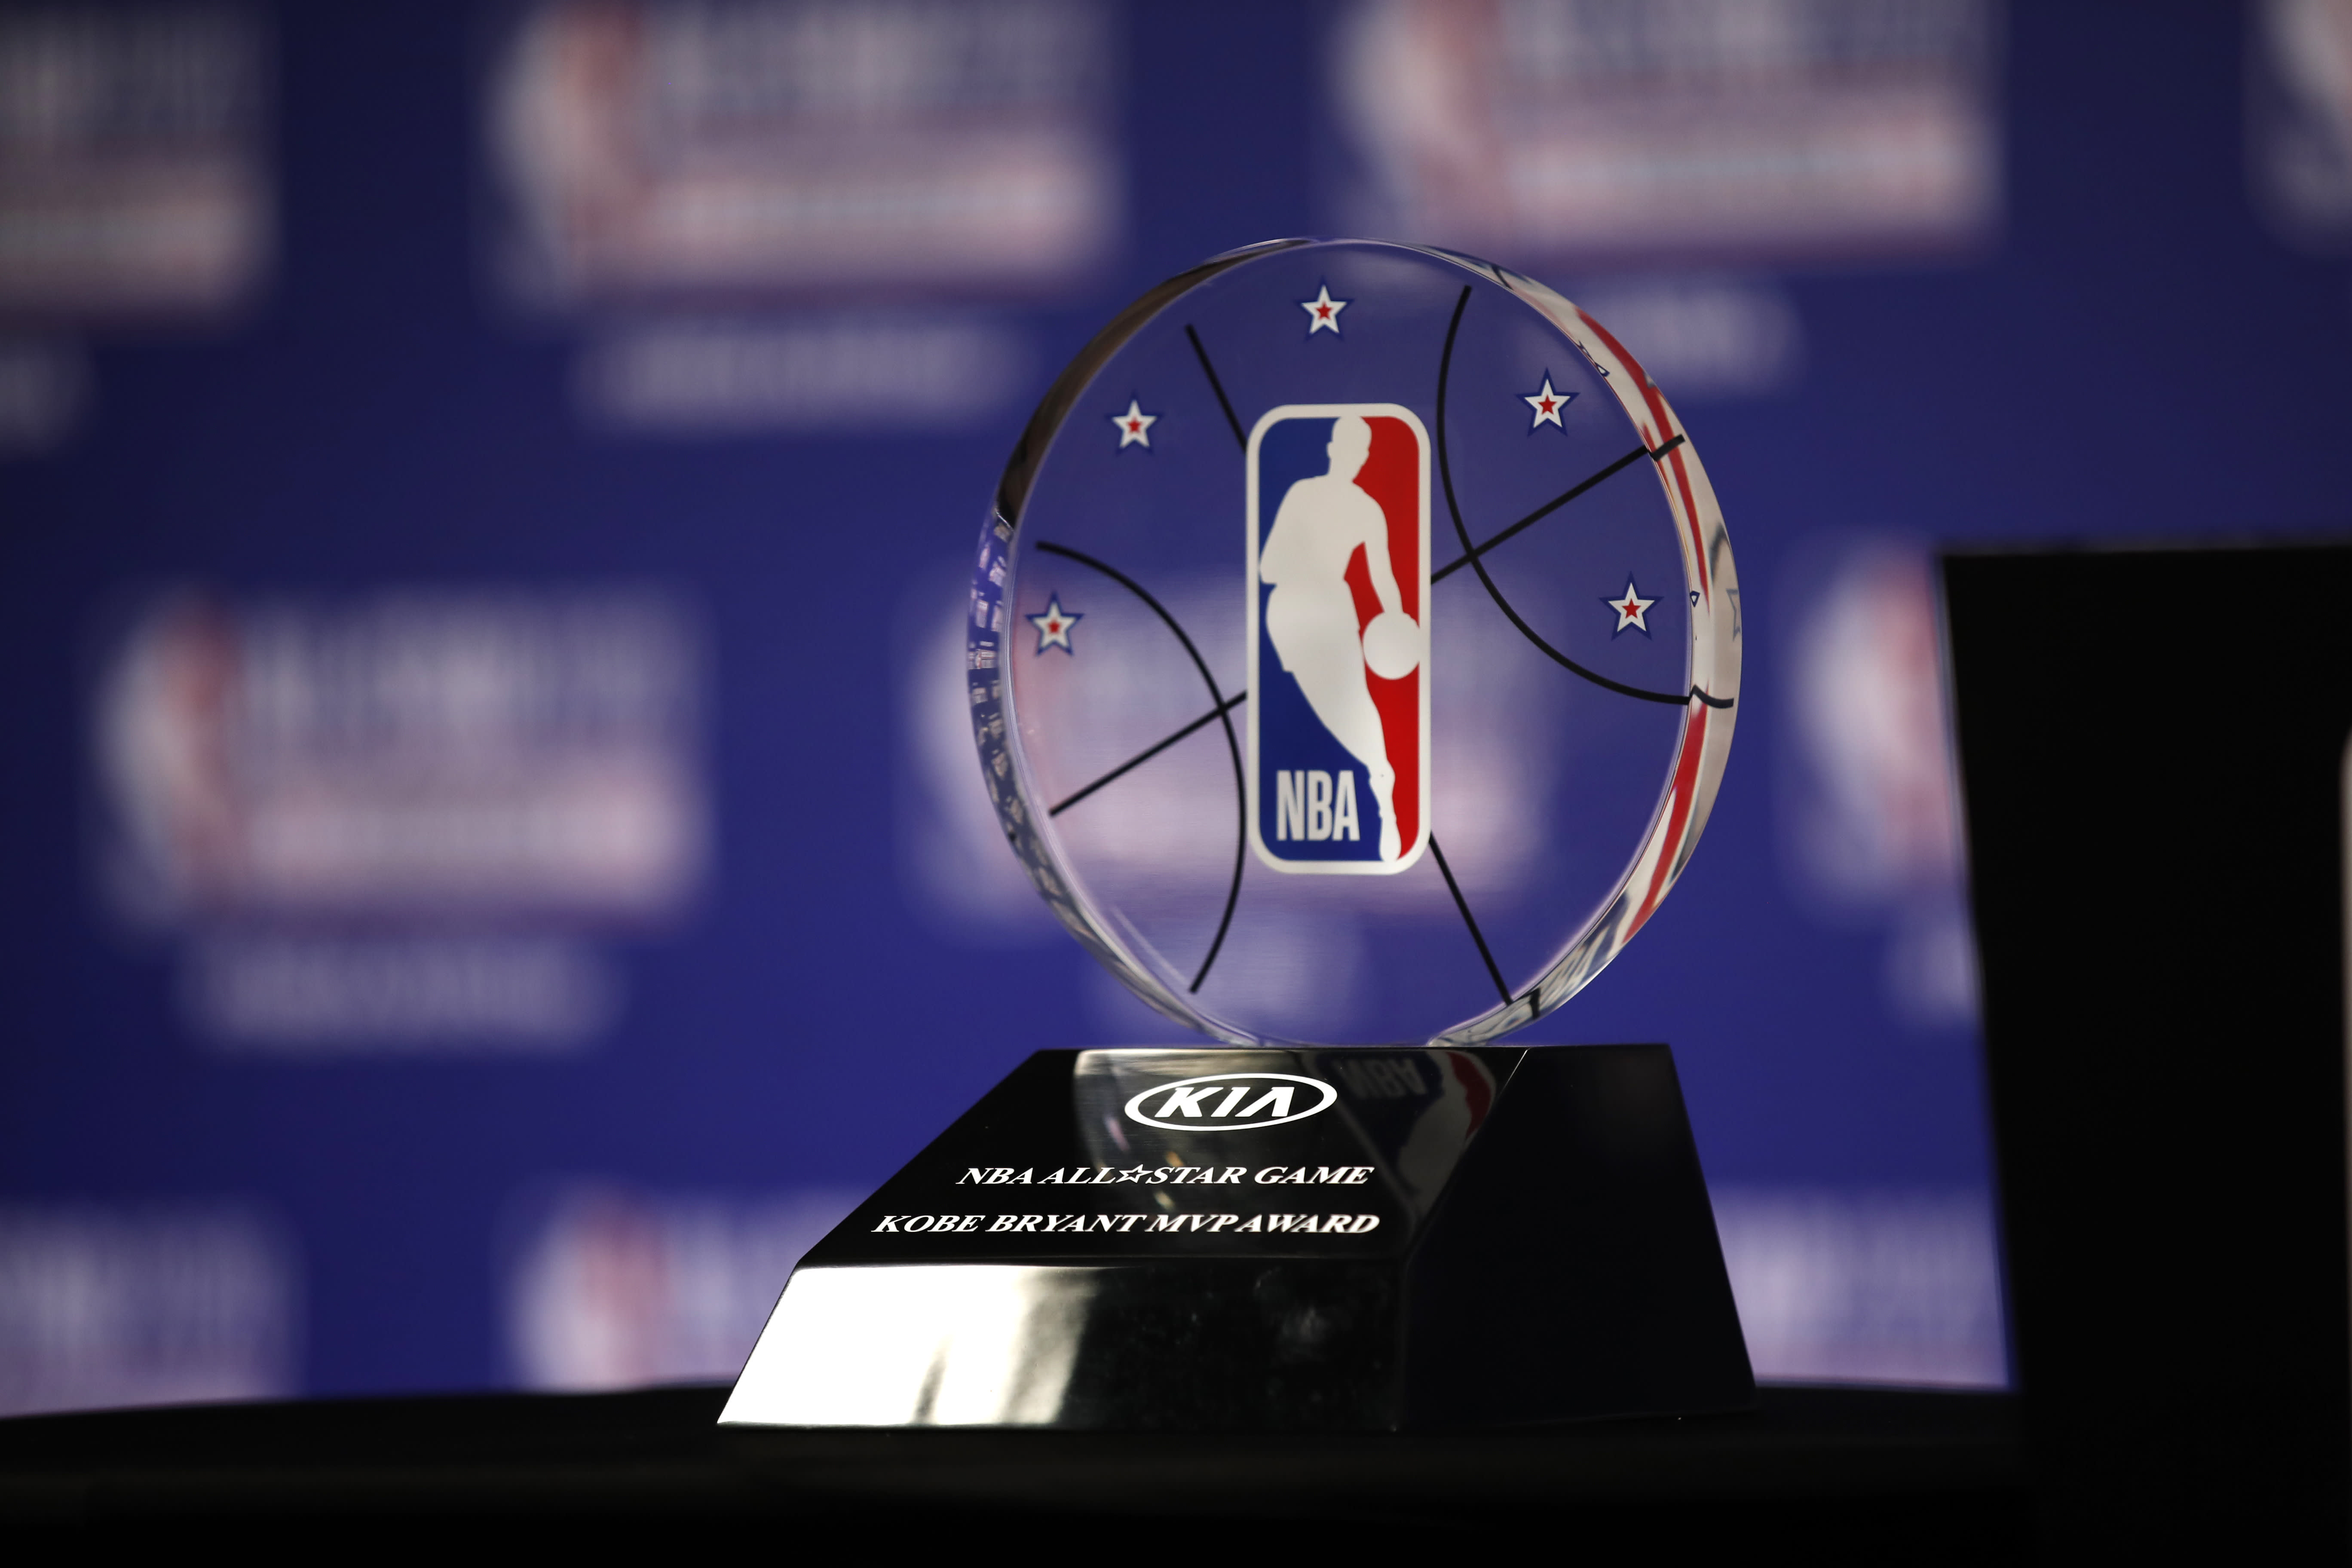 What do you think about the NBA naming the MVP trophy after